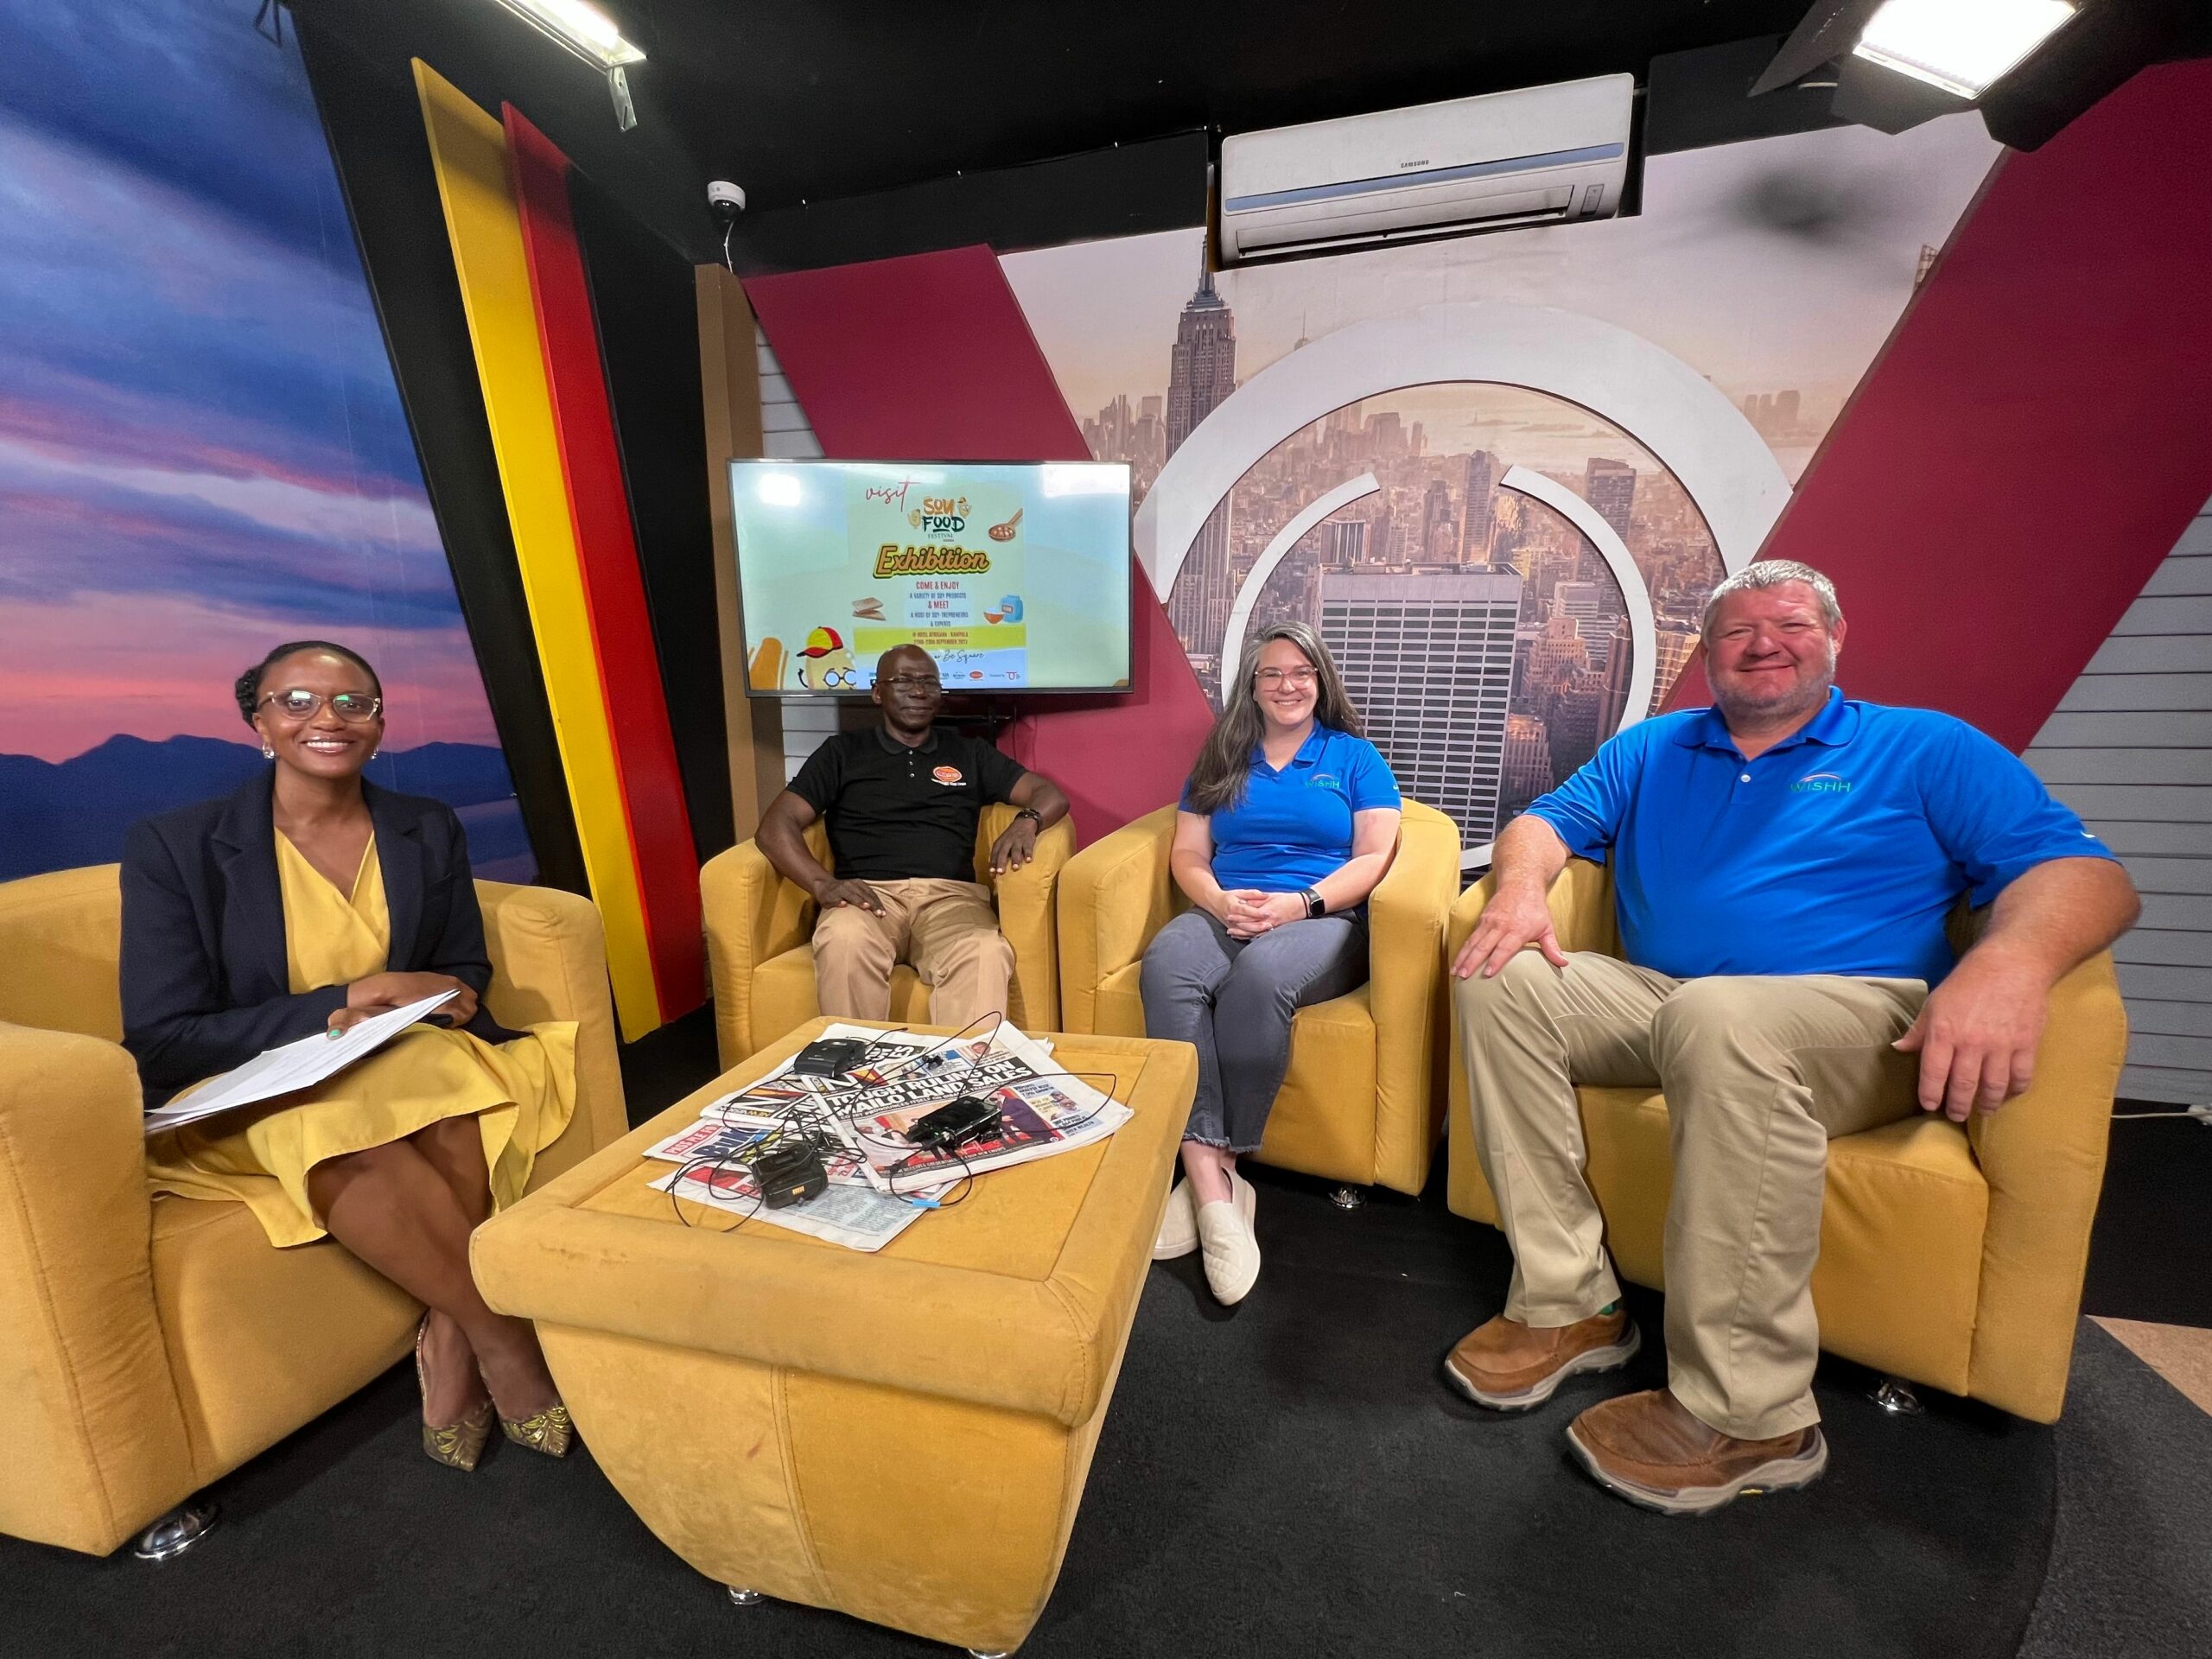 From right to left, Daniel Adams, Gena Perry, Charles Nsubuga, and a newscaster sit in seats around a coffee table on a news set.